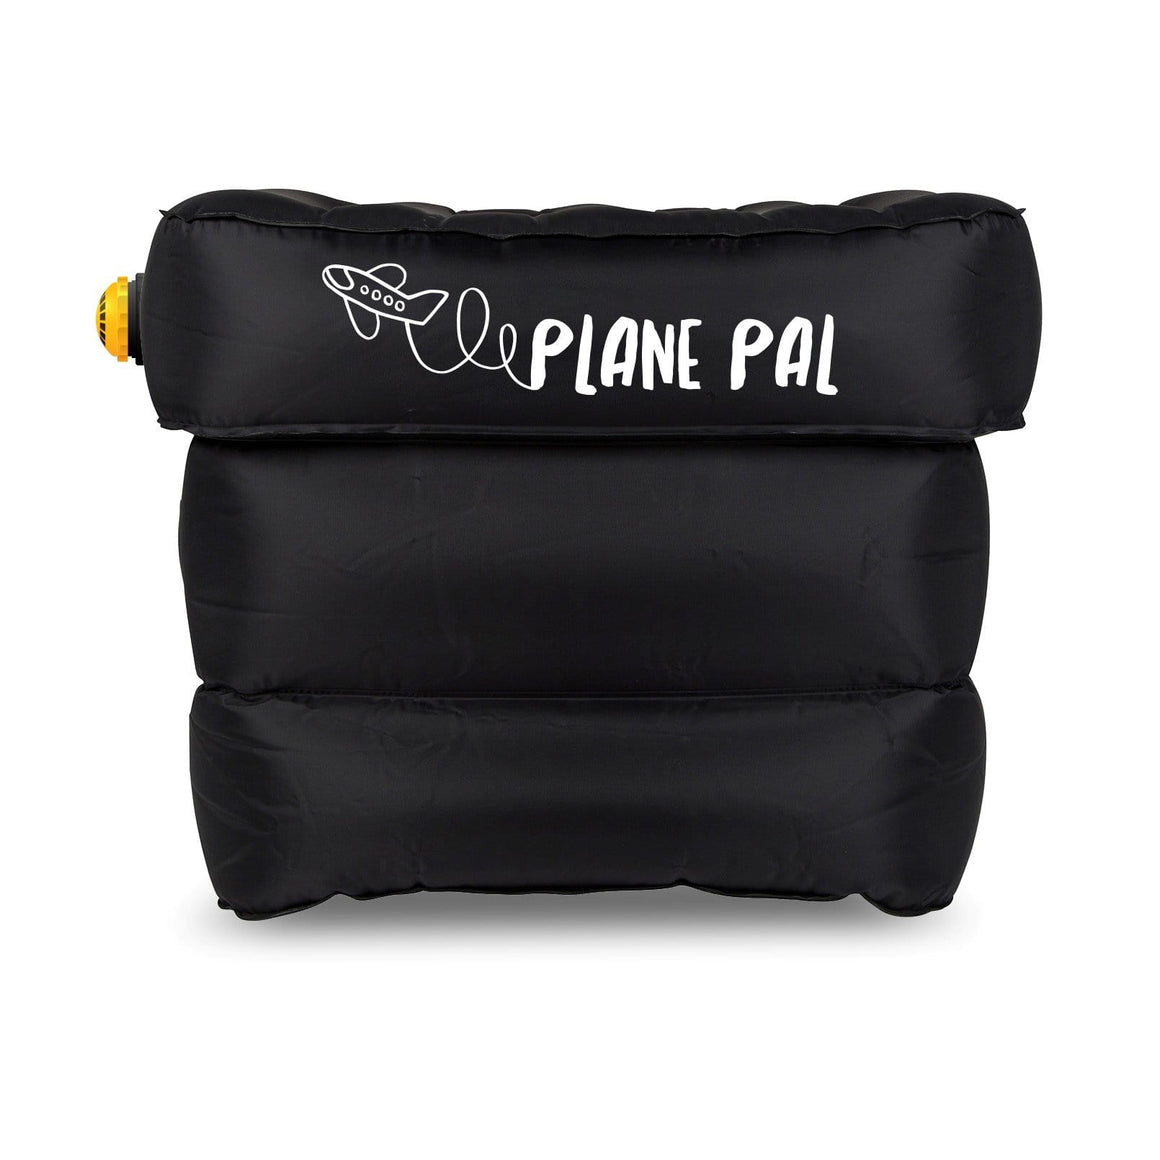 Plane Pal - Additional Pillow Only (No Pump).